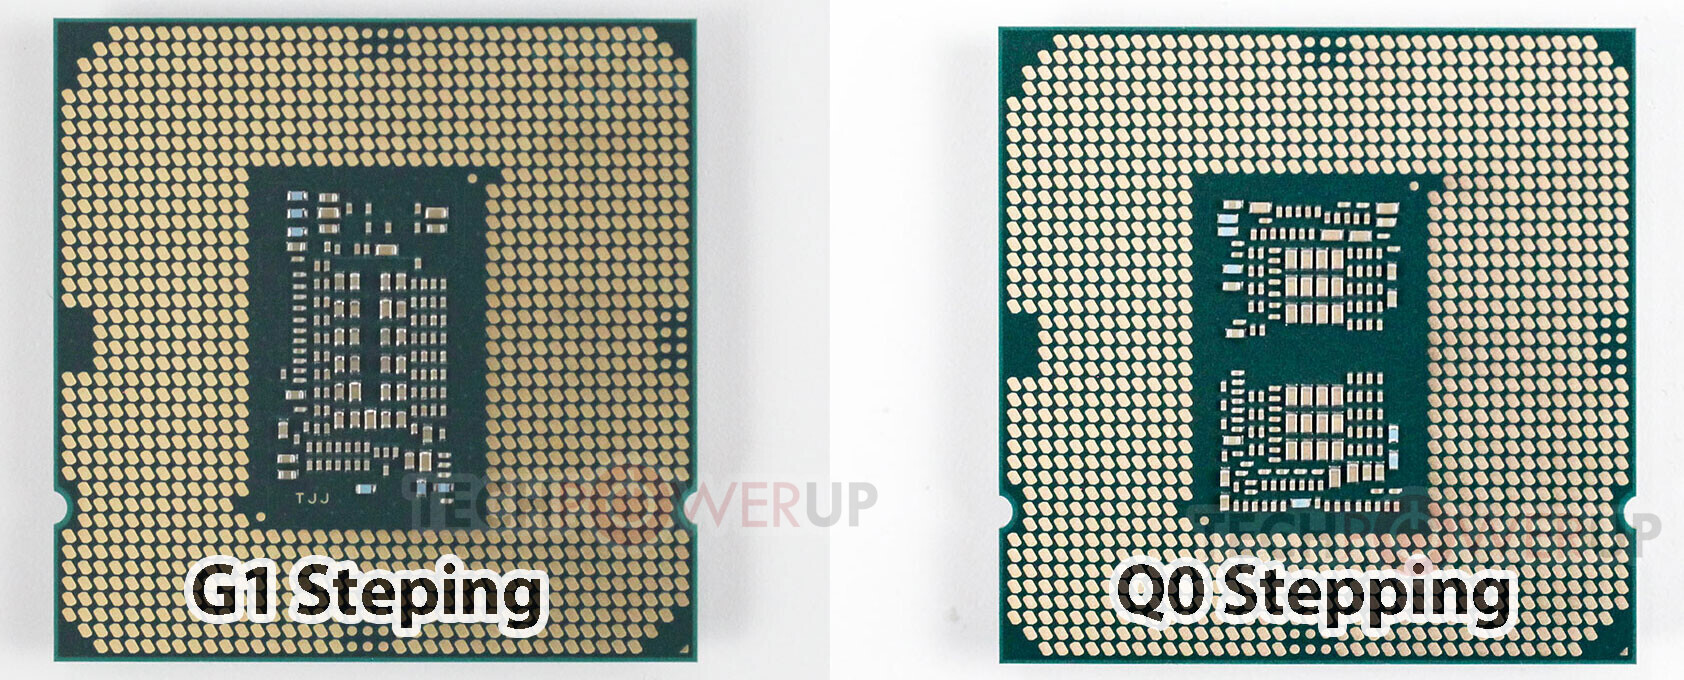 PSA: There are Two Steppings of Non-K 10th Gen Core i5 in 